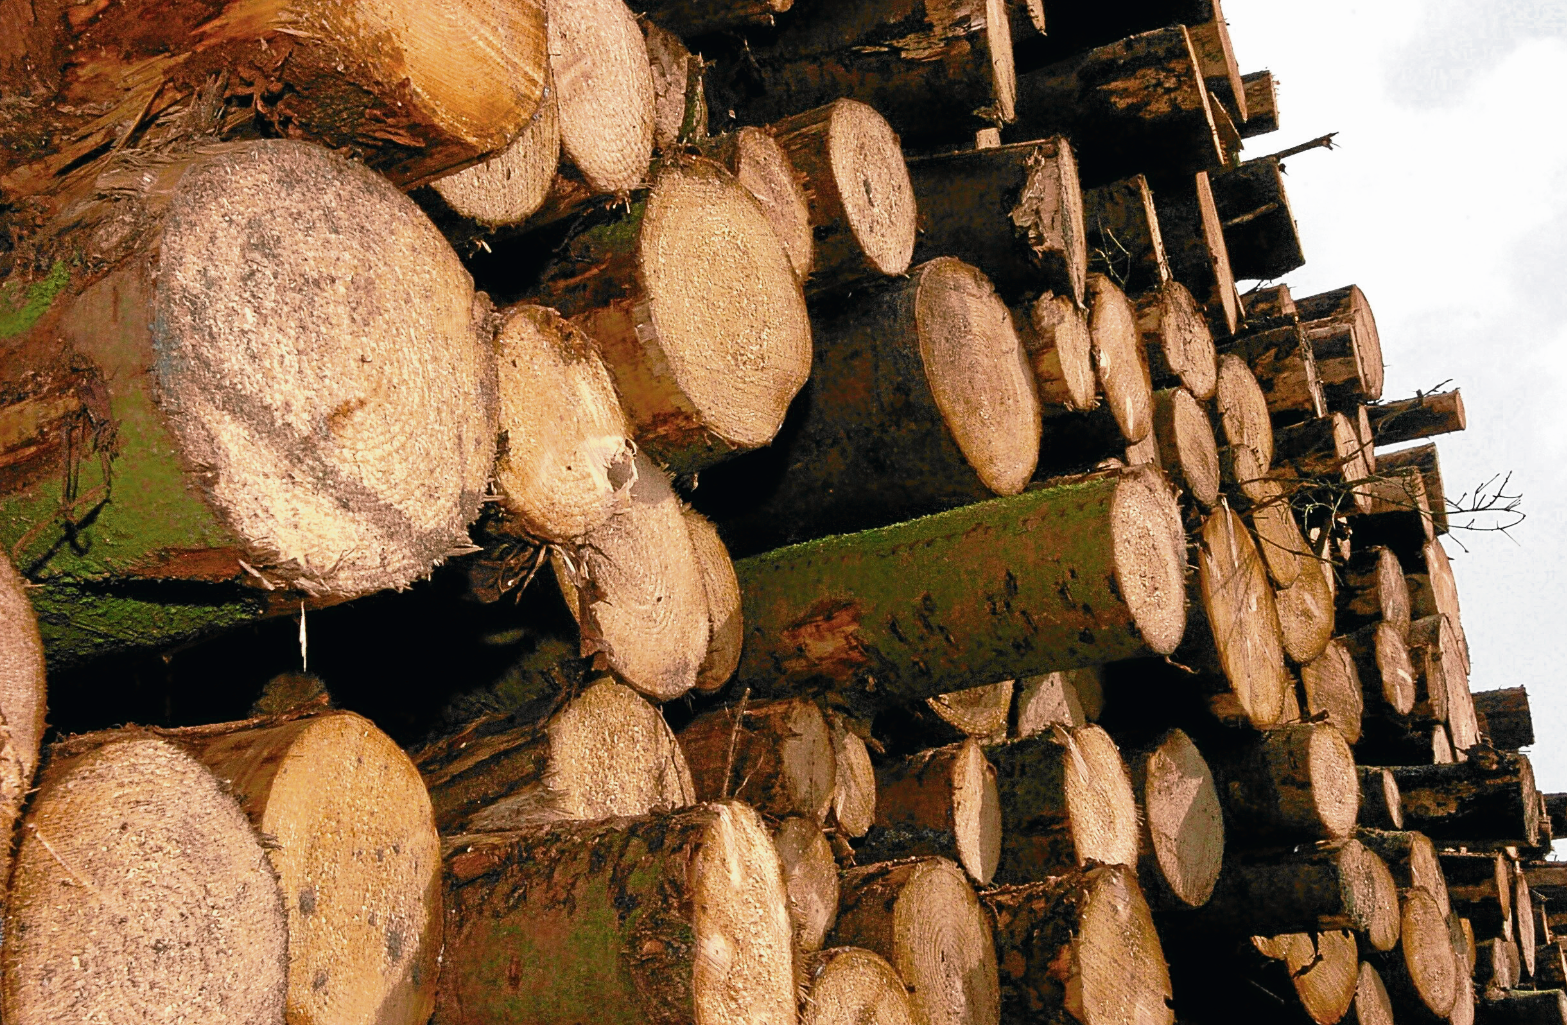 The forestry sector is worth almost £1 billion a year to Scotland